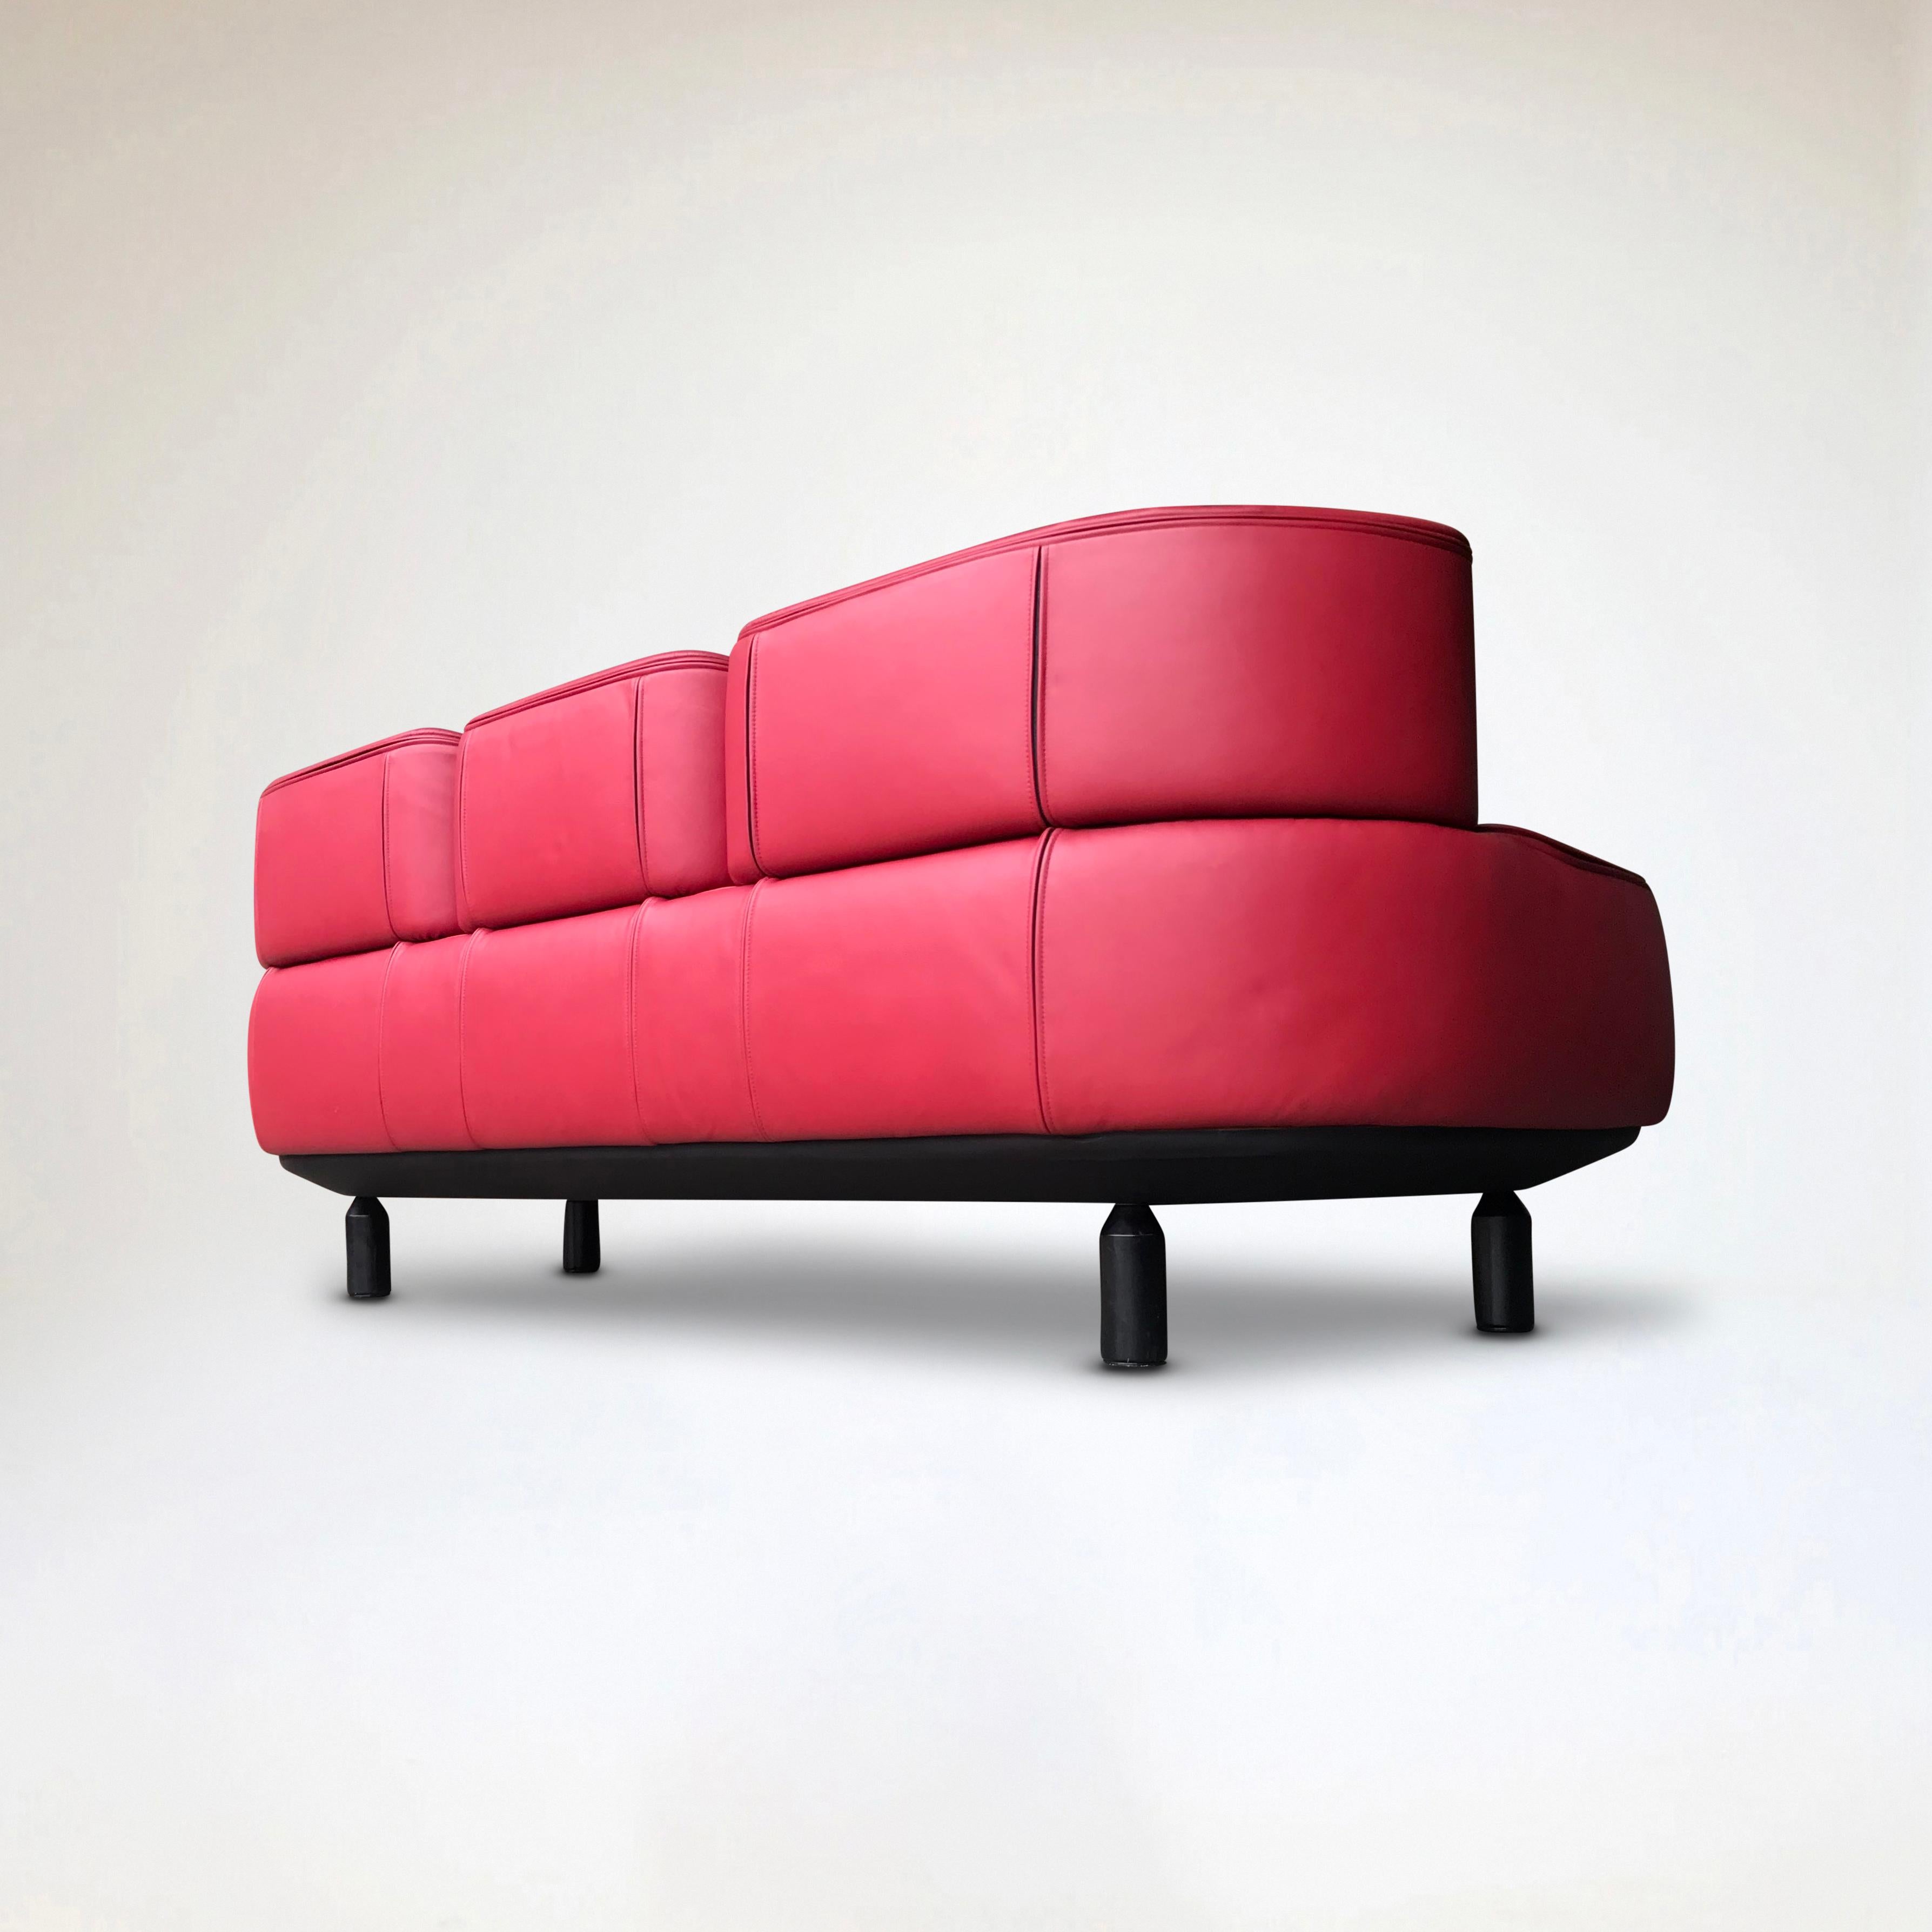 Bull 3-seater red leather sofa by Gianfranco Frattini for Cassina 1987 For Sale 6